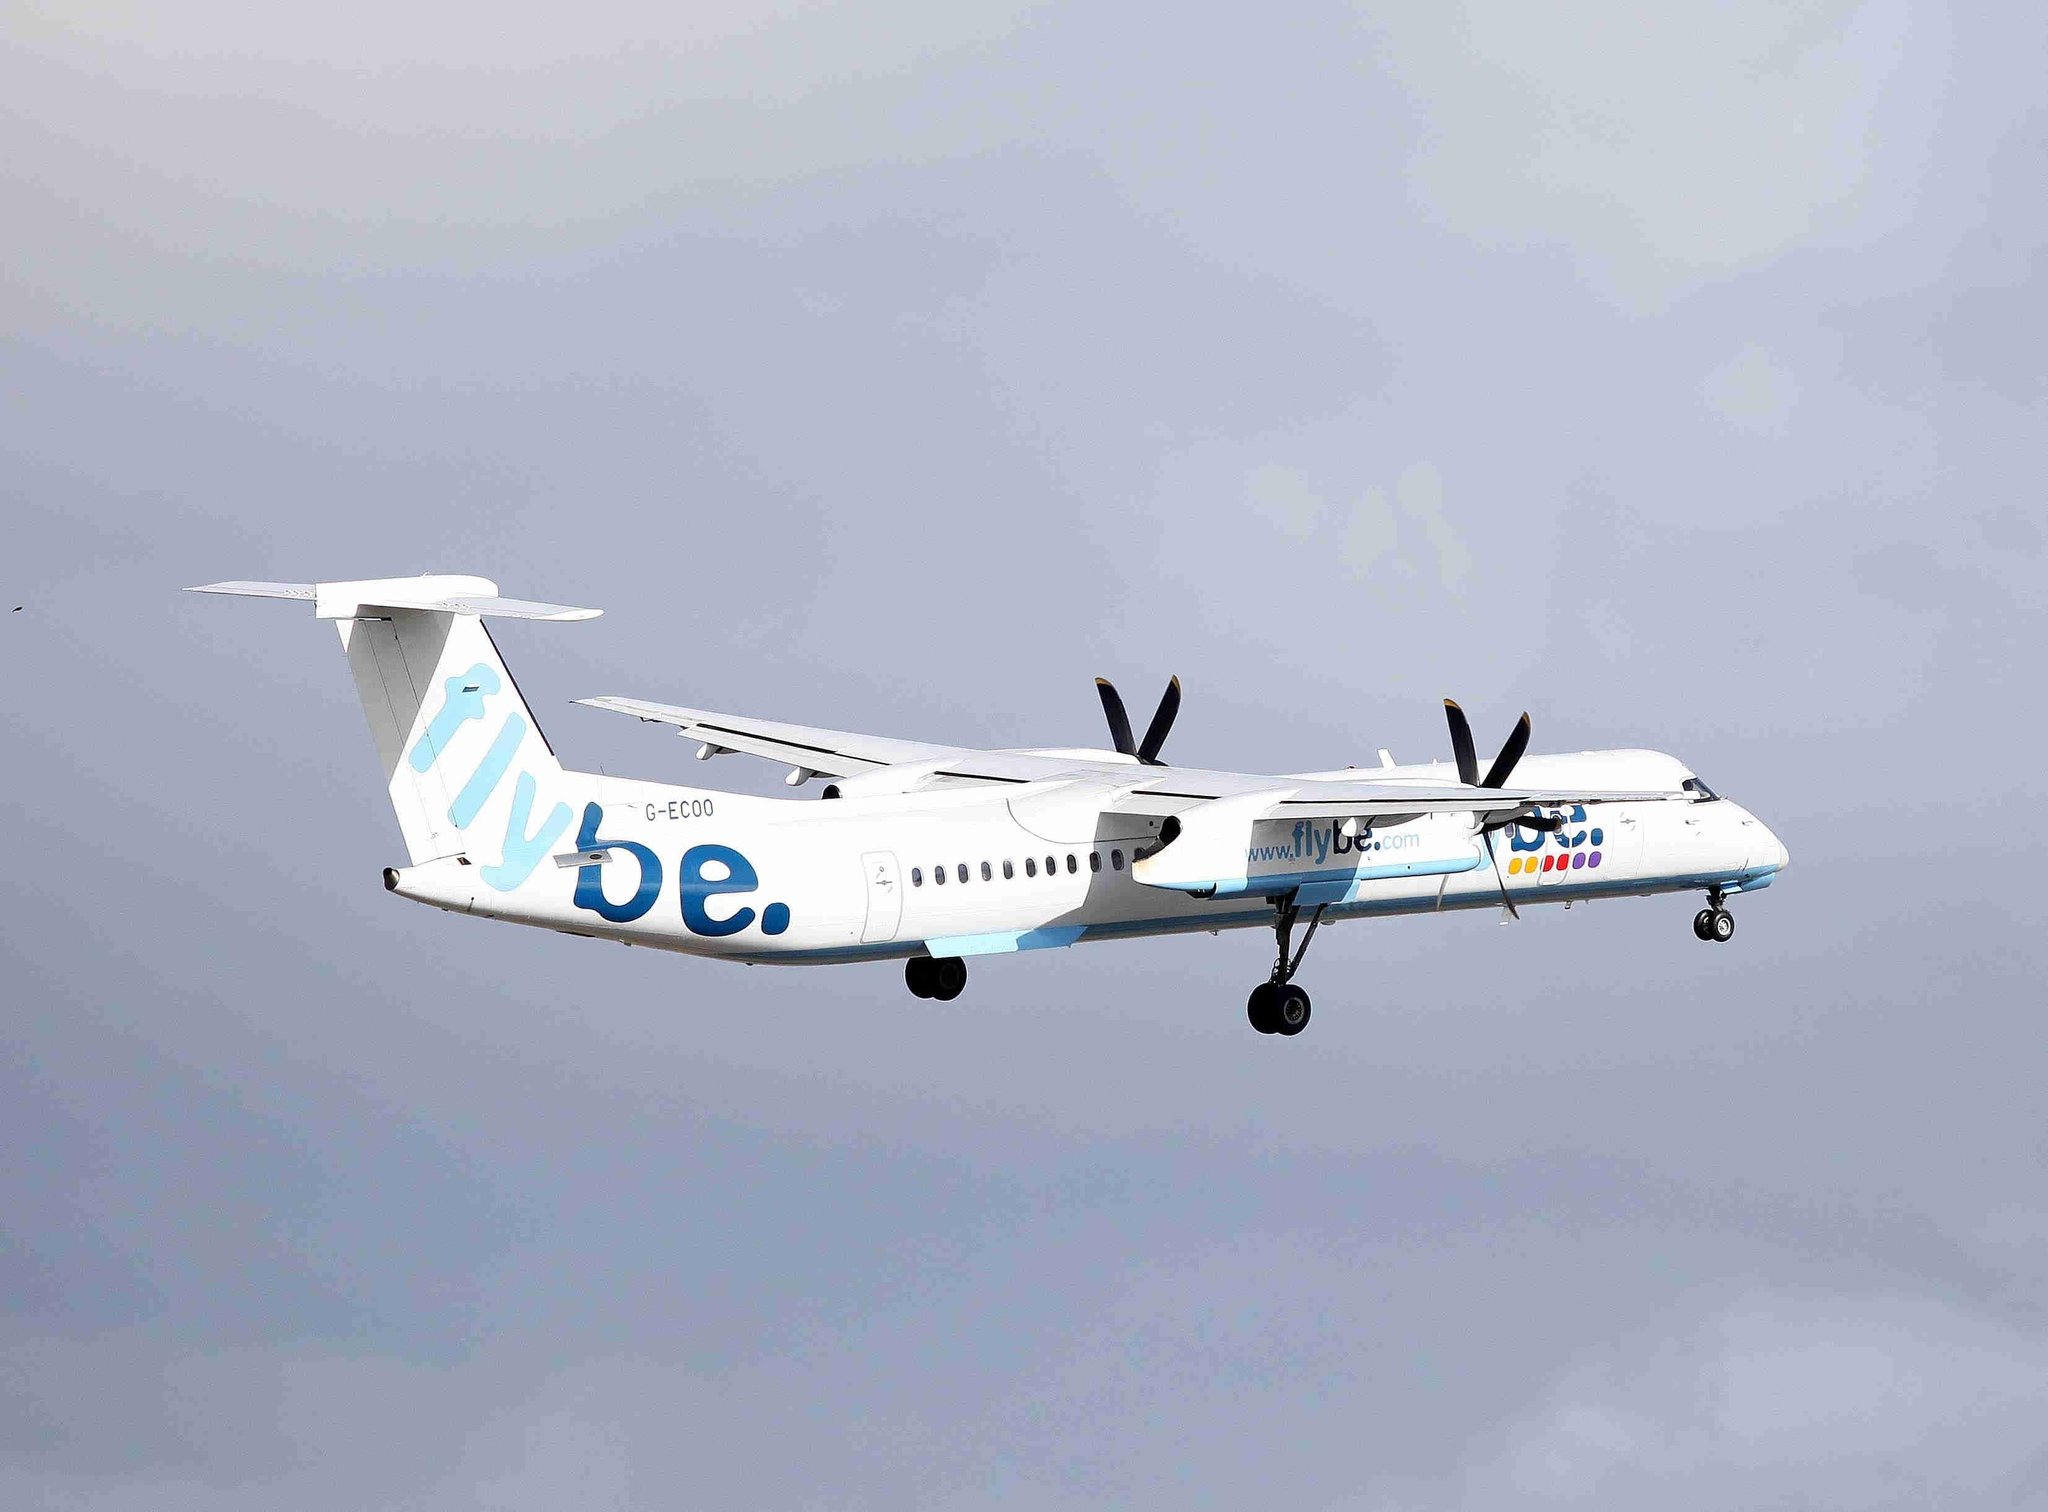 Flybe will return to the skies in April